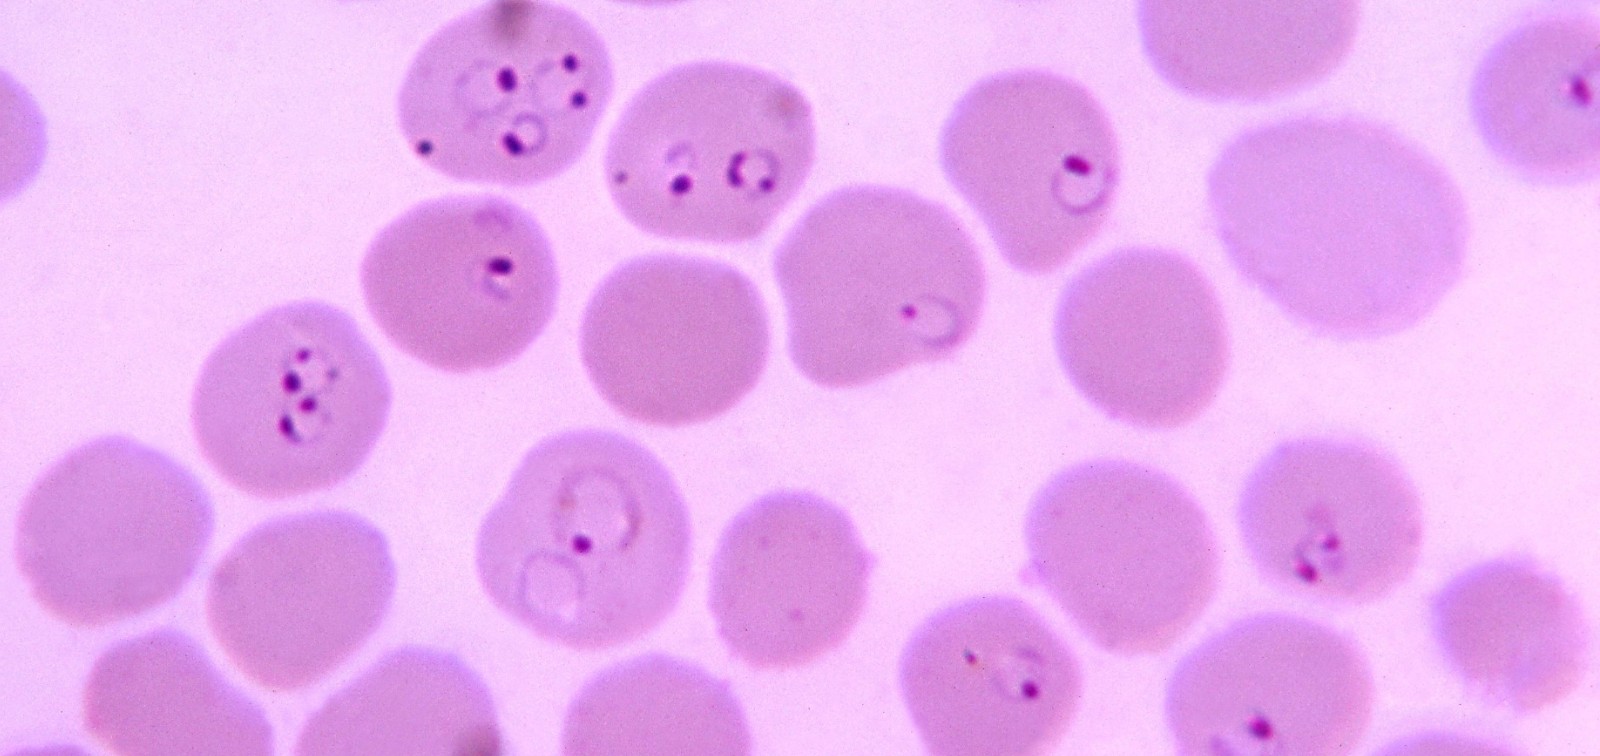 Microscopy image of erithrocytes infected with malaria parasite